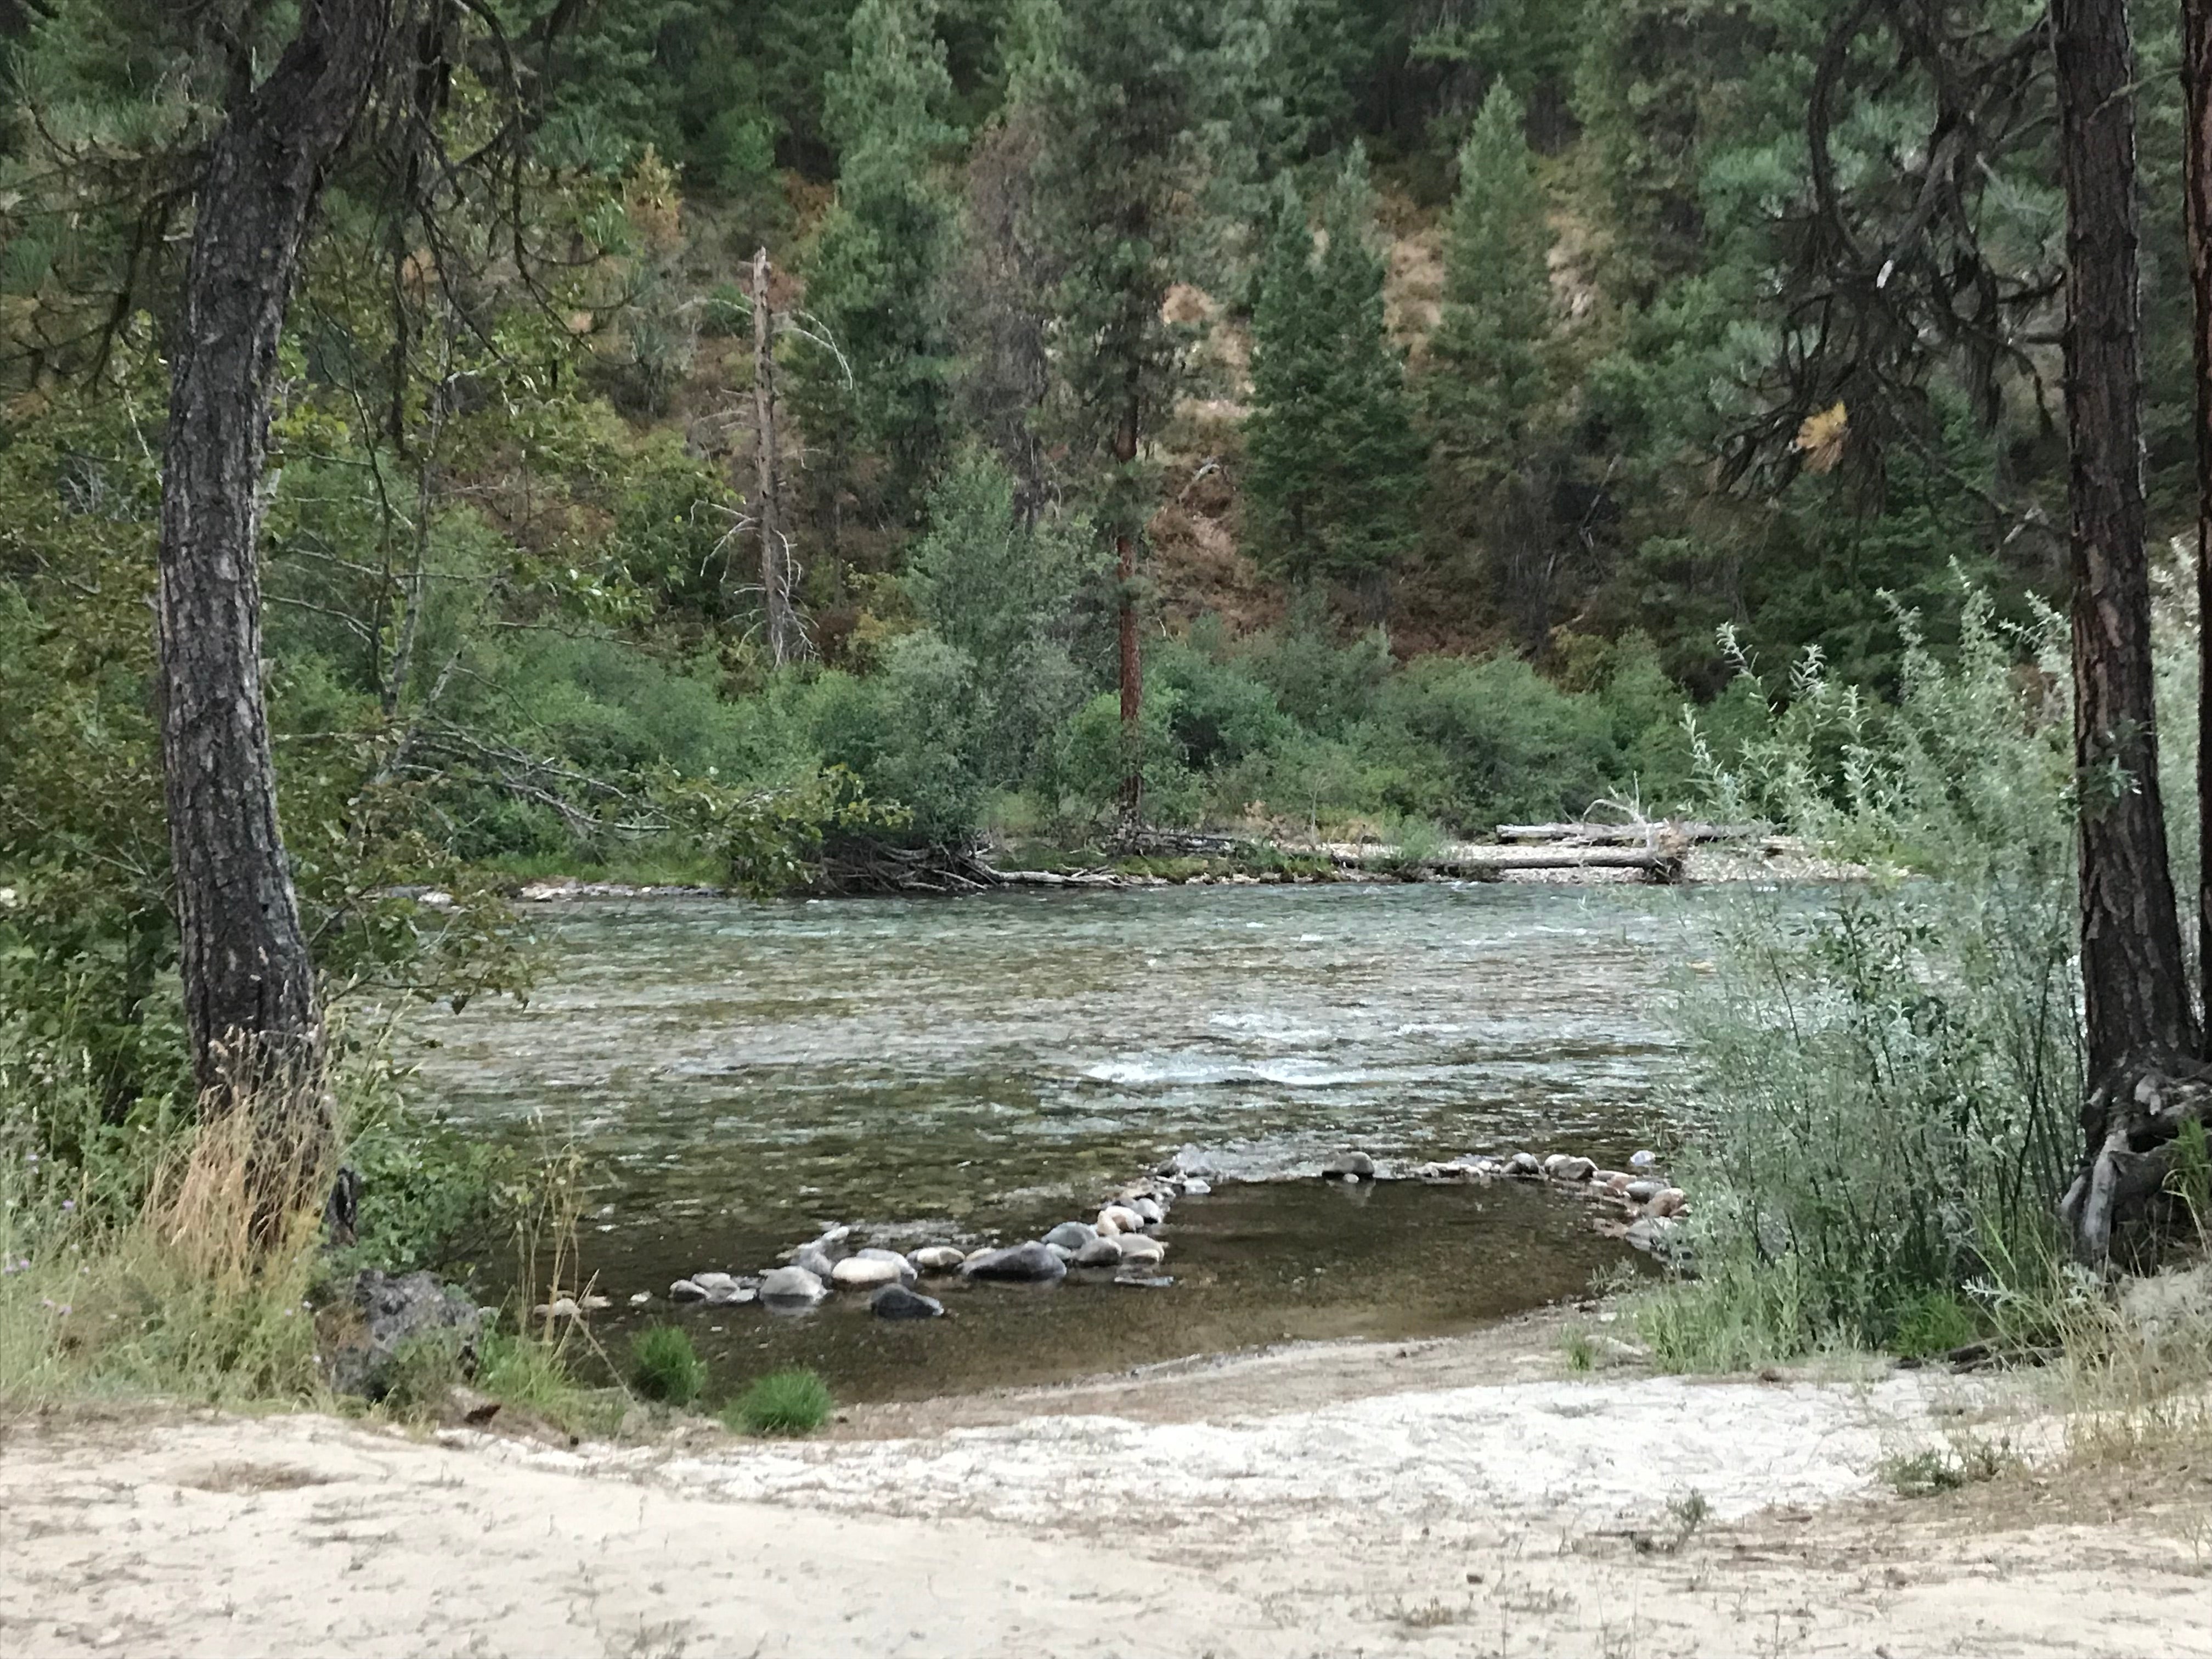 View of the Payette river from our site